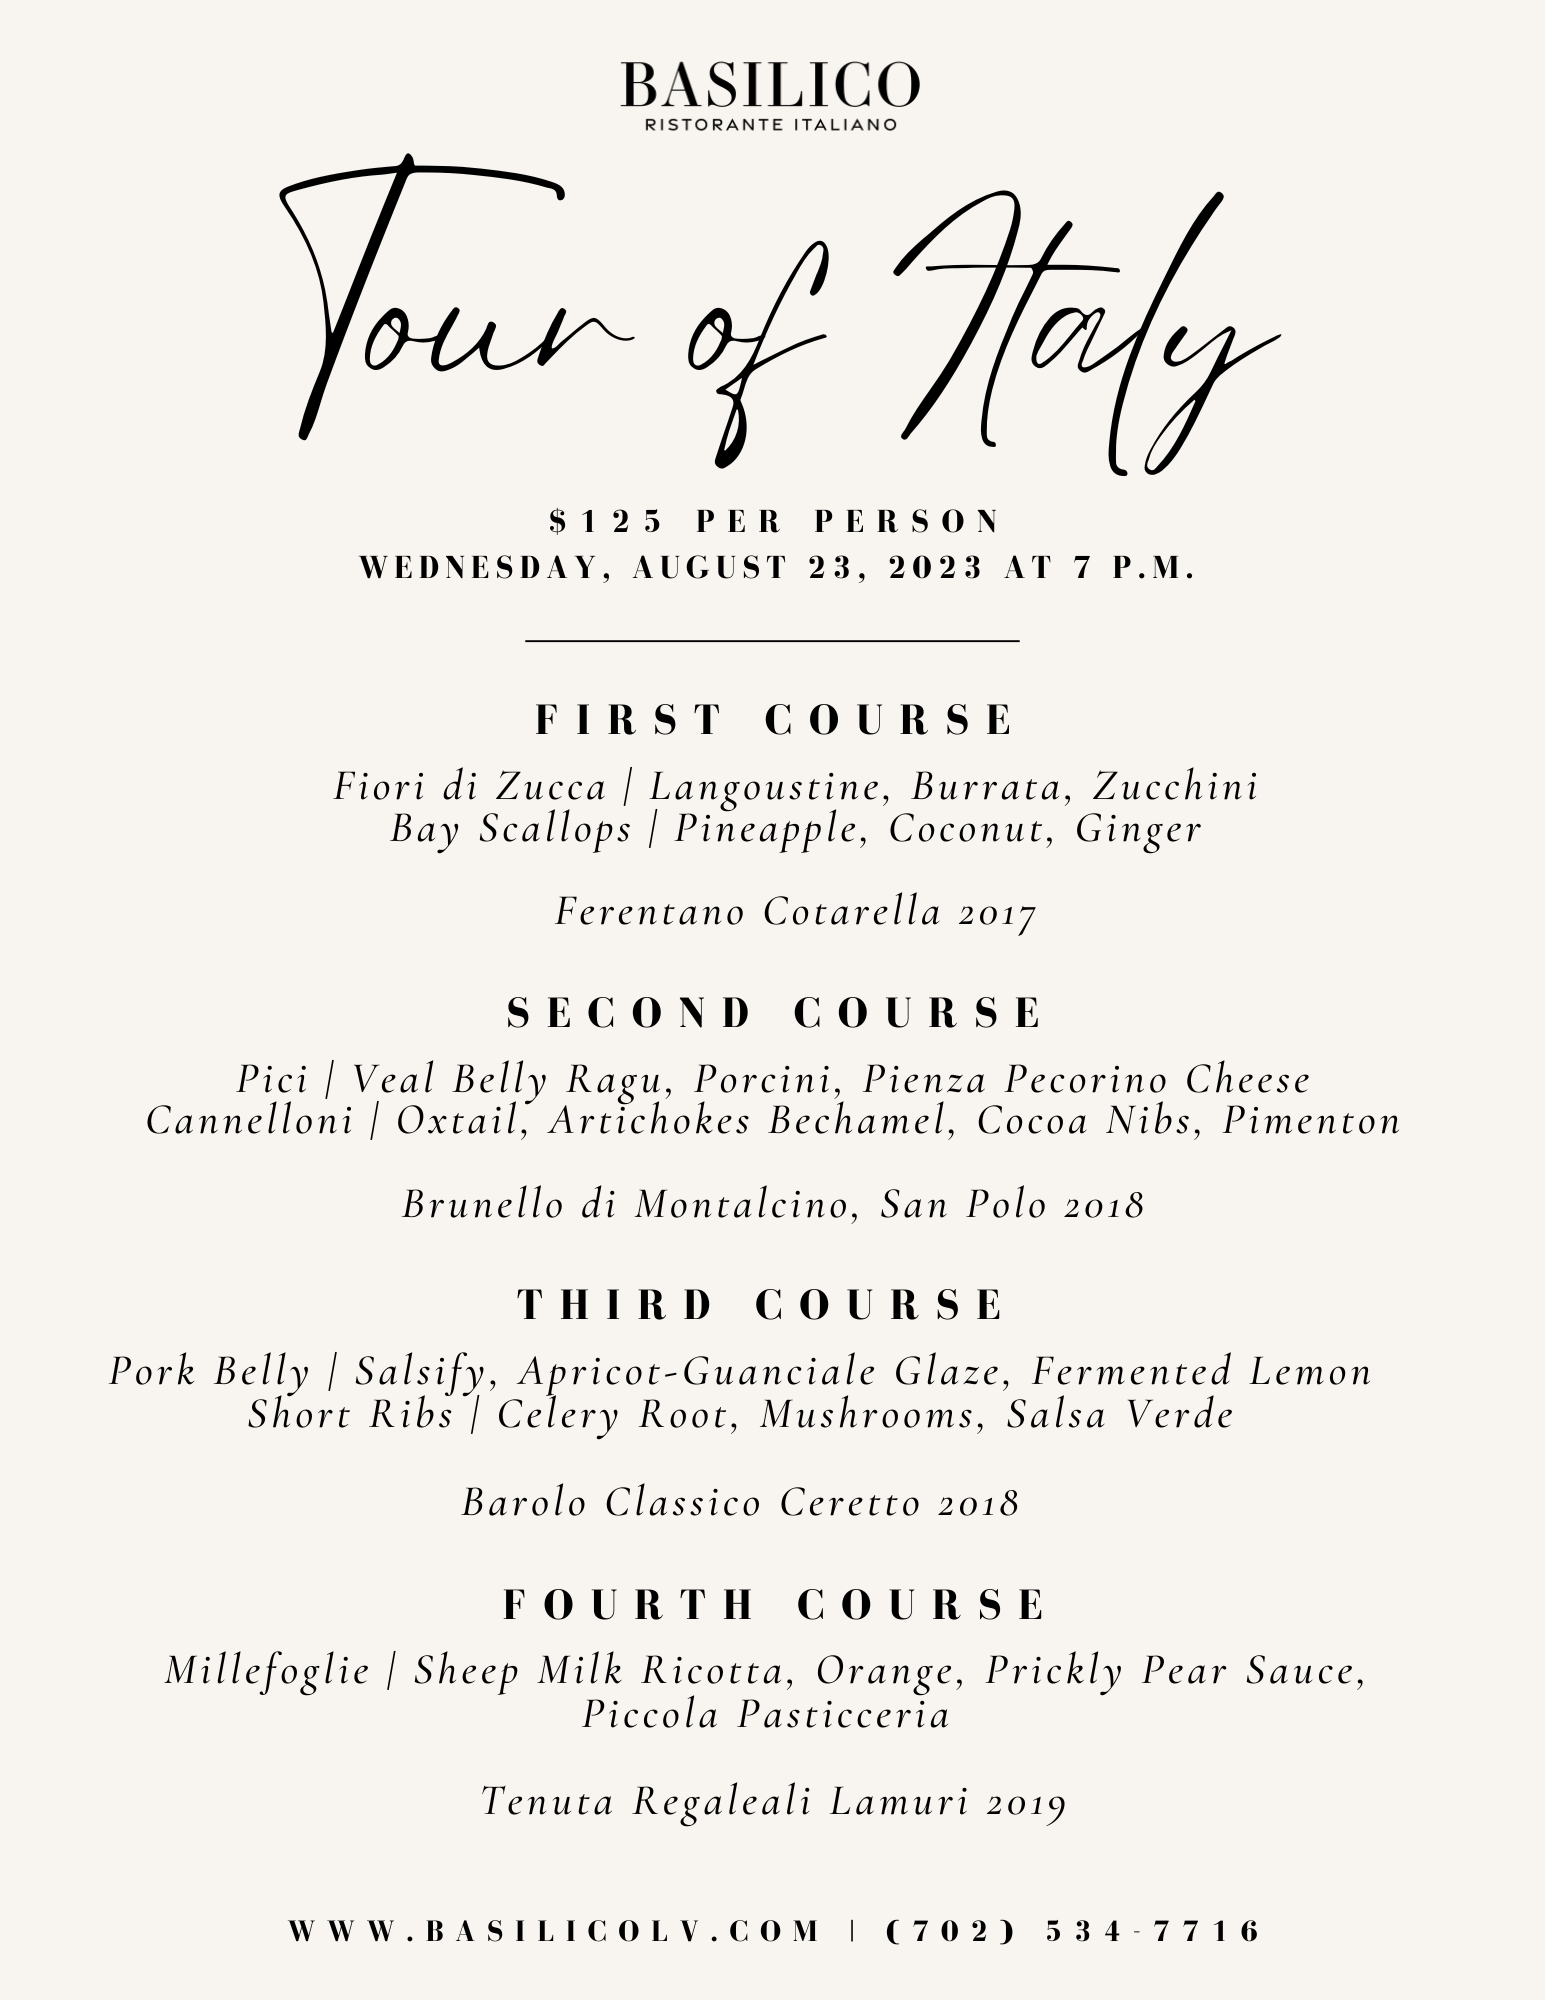 Indulge in a Quality Dinner Experience with a "Tour of Italy" at Basilico's First Wine Dinner Located in Evora in Southwest Las Vegas